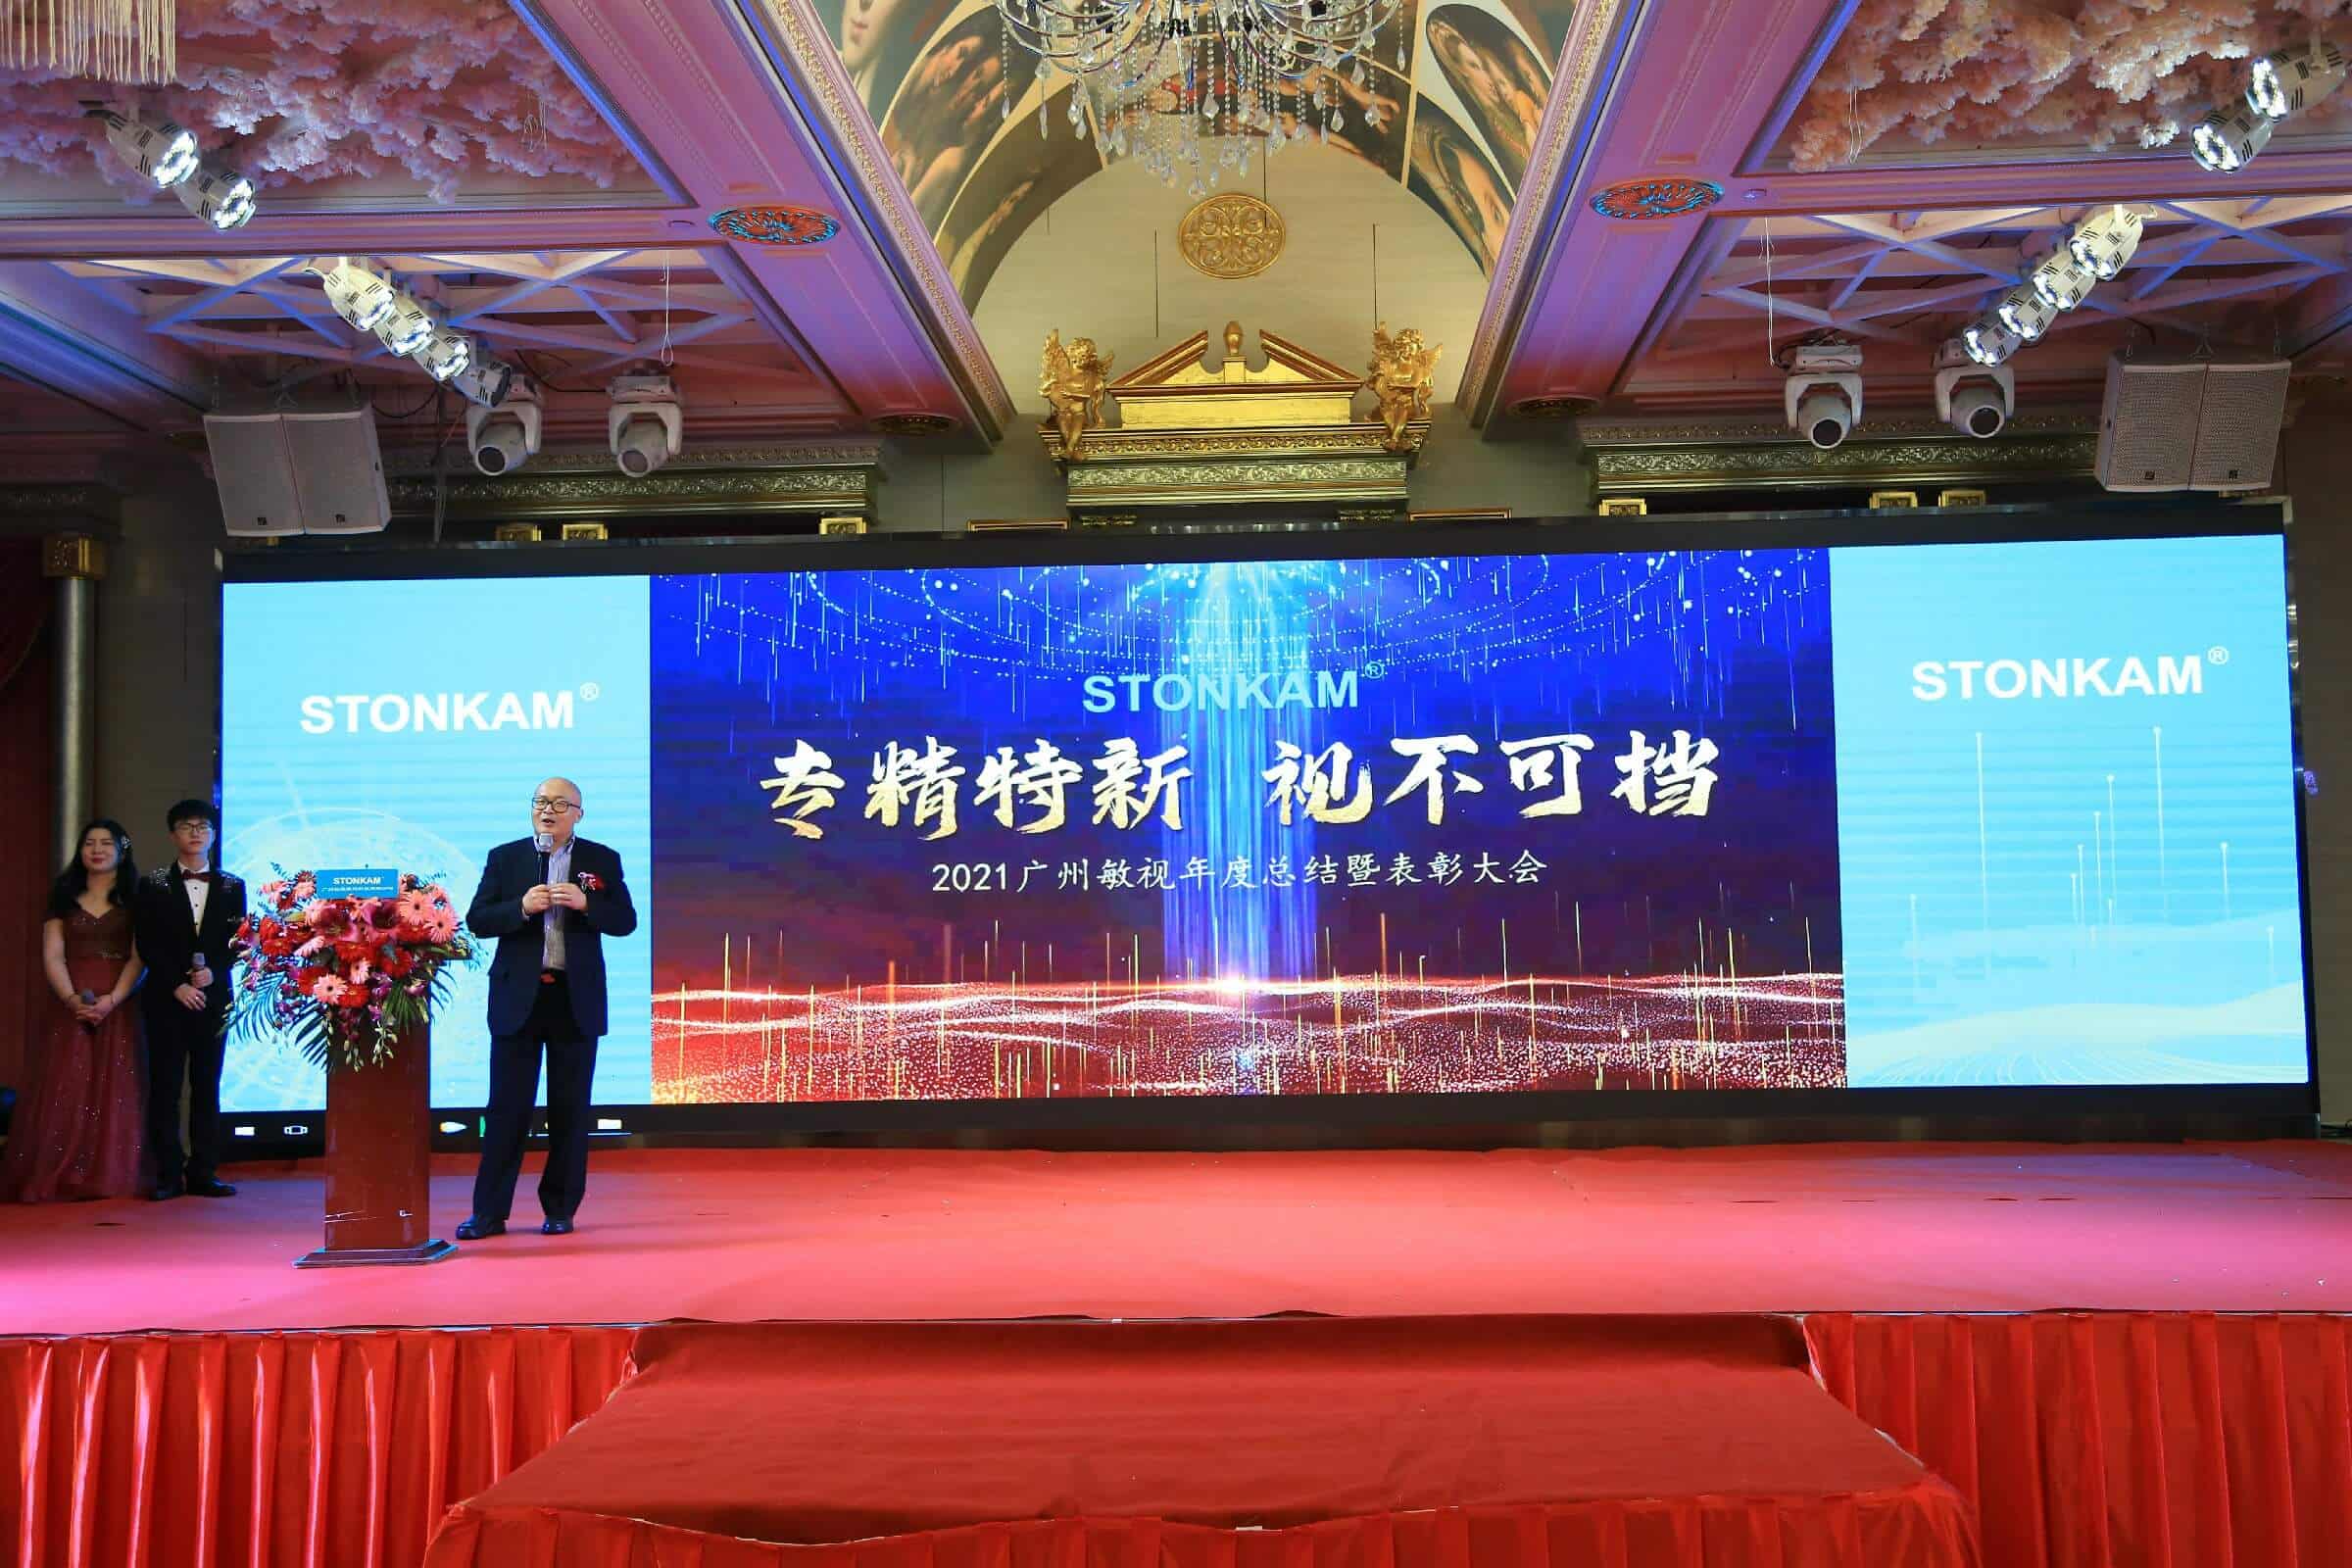 2021 Annual Summary and Commendation Conference and the 2022 Spring Festival Gala of STONKAM